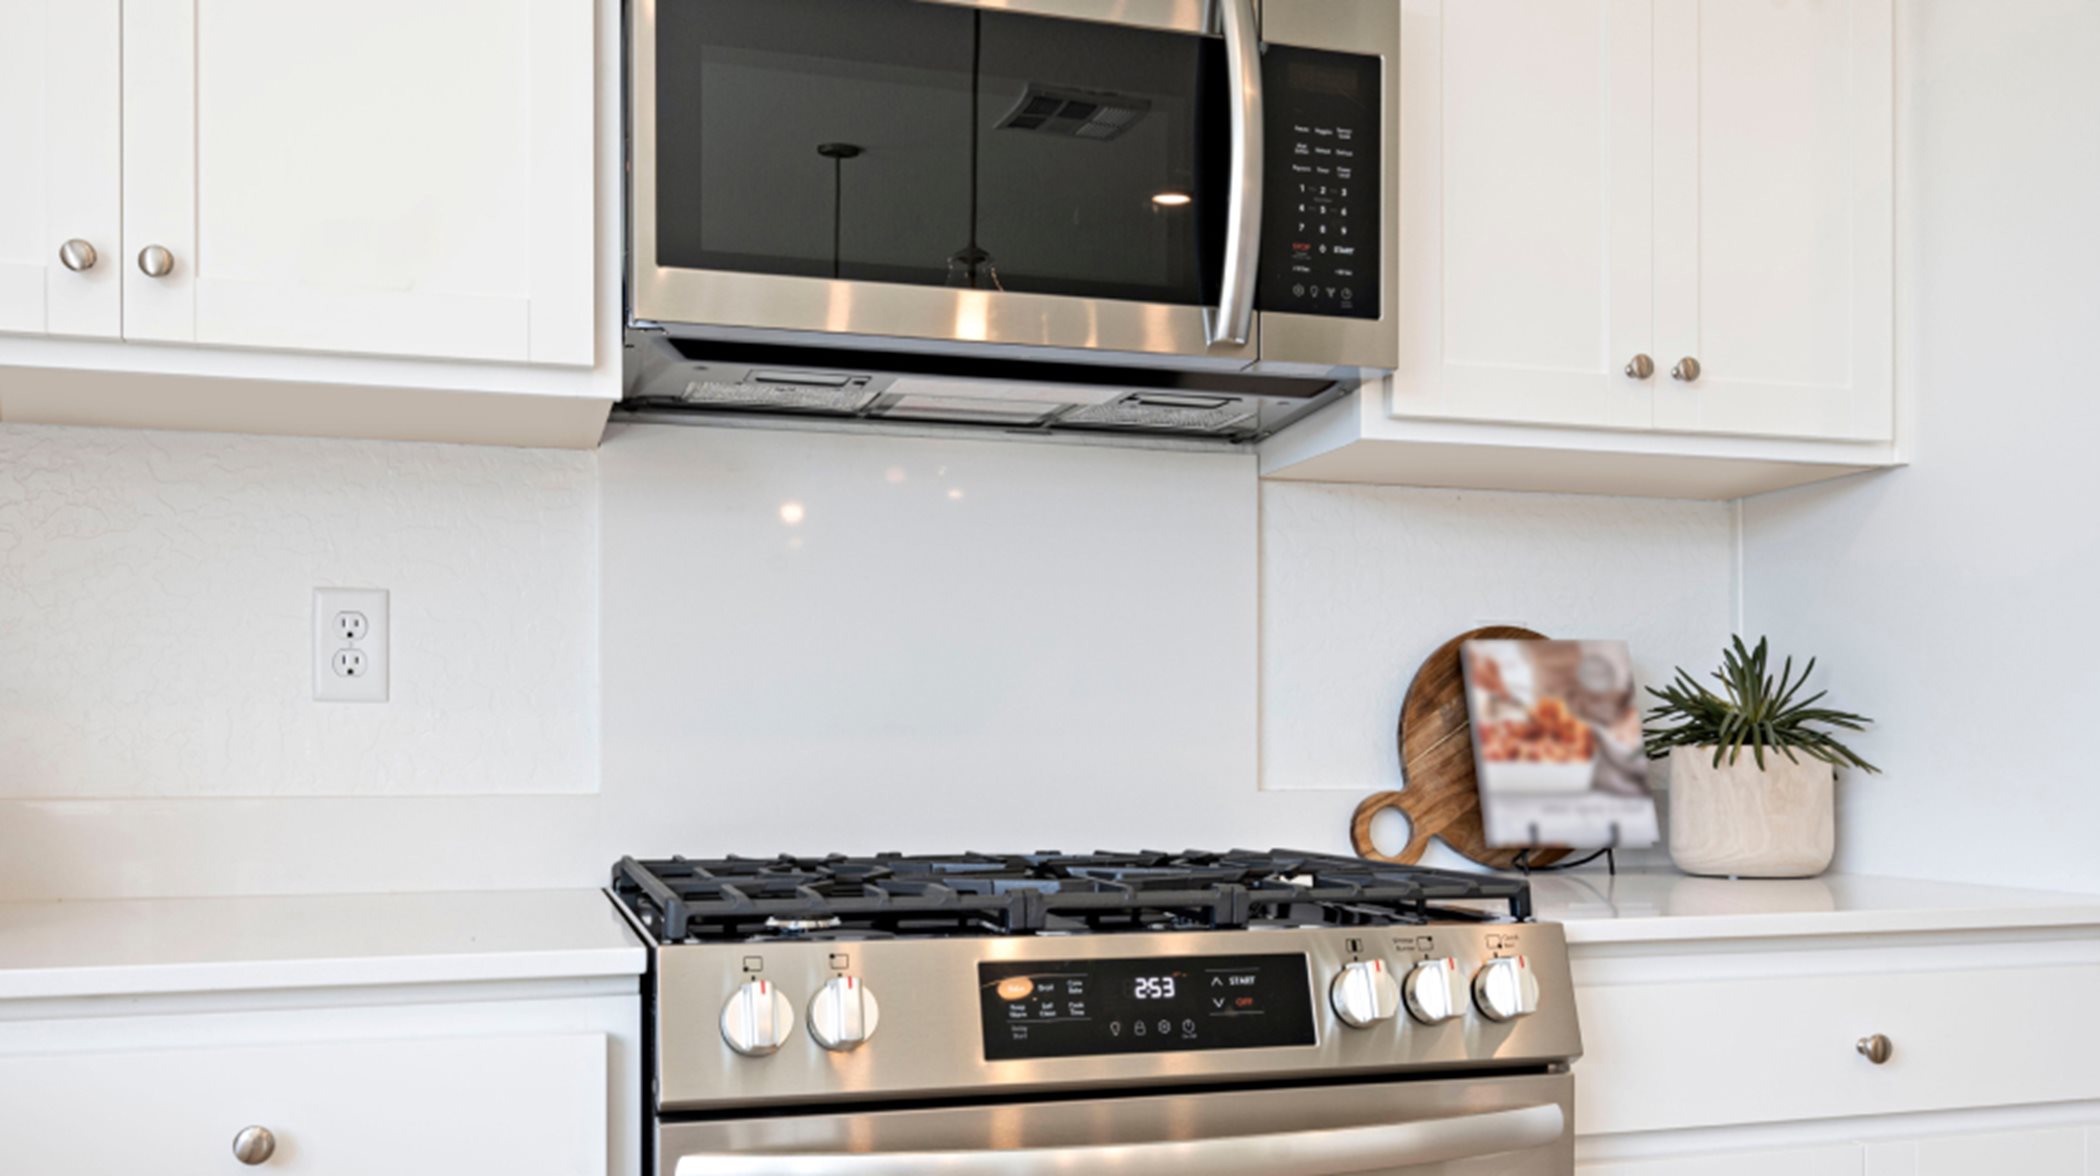 Frigidaire® stainless steel appliance package